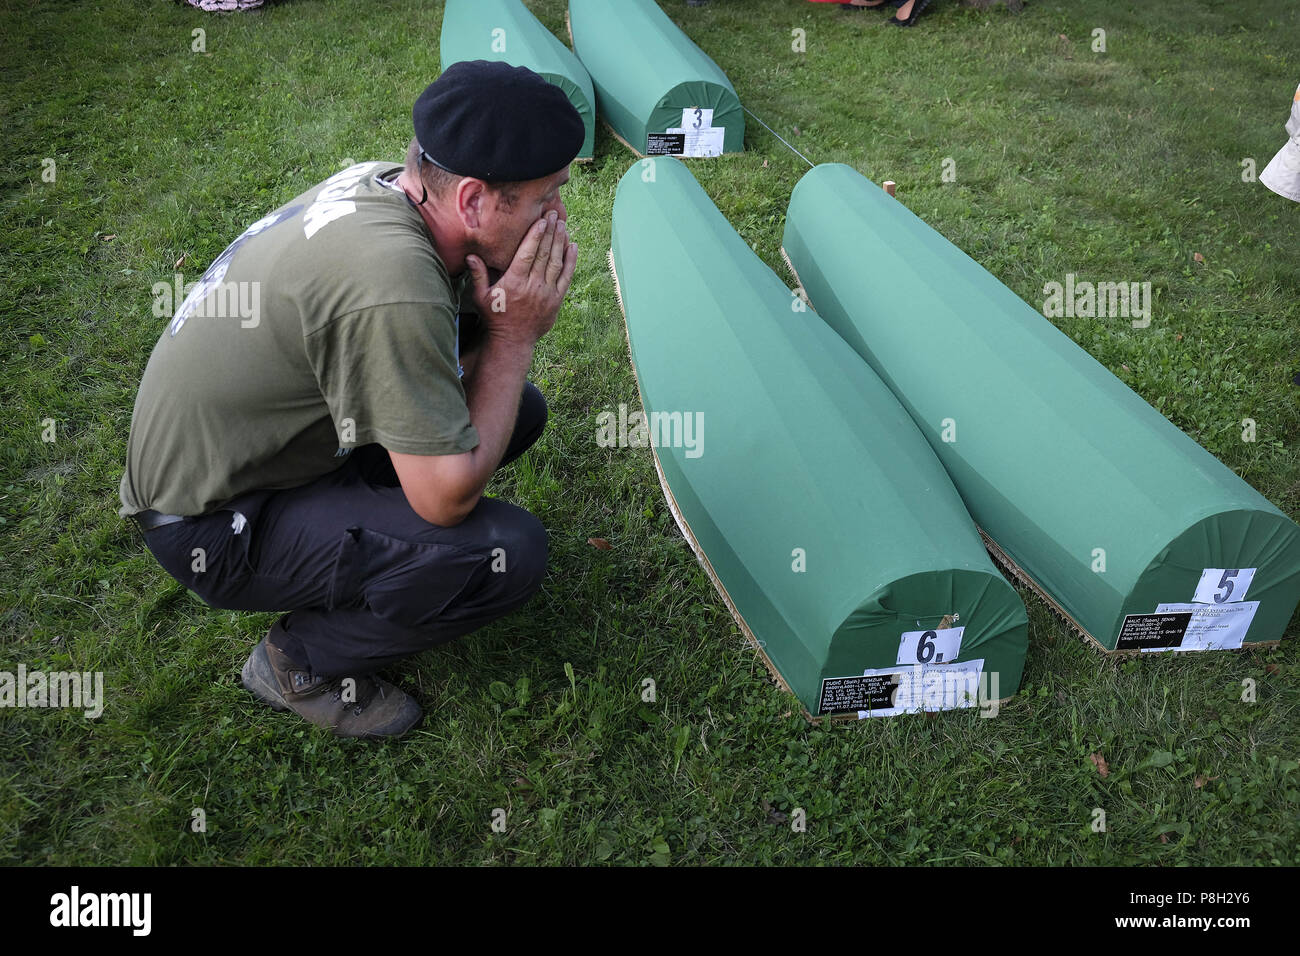 July 10, 2018 - Srebrenica, Bosnia - Twenty-three years have passed since the Srebrenica Genocide took the lives of more than 7000 victims in Bosnia and Herzegovina between 1992 and 1995. This horrific event is commemorated annually on July 10 because on that day in 1995 Bosnian Serb forces, commanded by convicted war criminal General R. Mladic, executed more than 7000 Muslim-Bosniak men, boys and elderly who had sought safety in the region after the fall of Srebrenica. Furthermore, another 25,000 people were forcibly deported in an UN-assisted ethnic cleansing that was later referred to by th Stock Photo